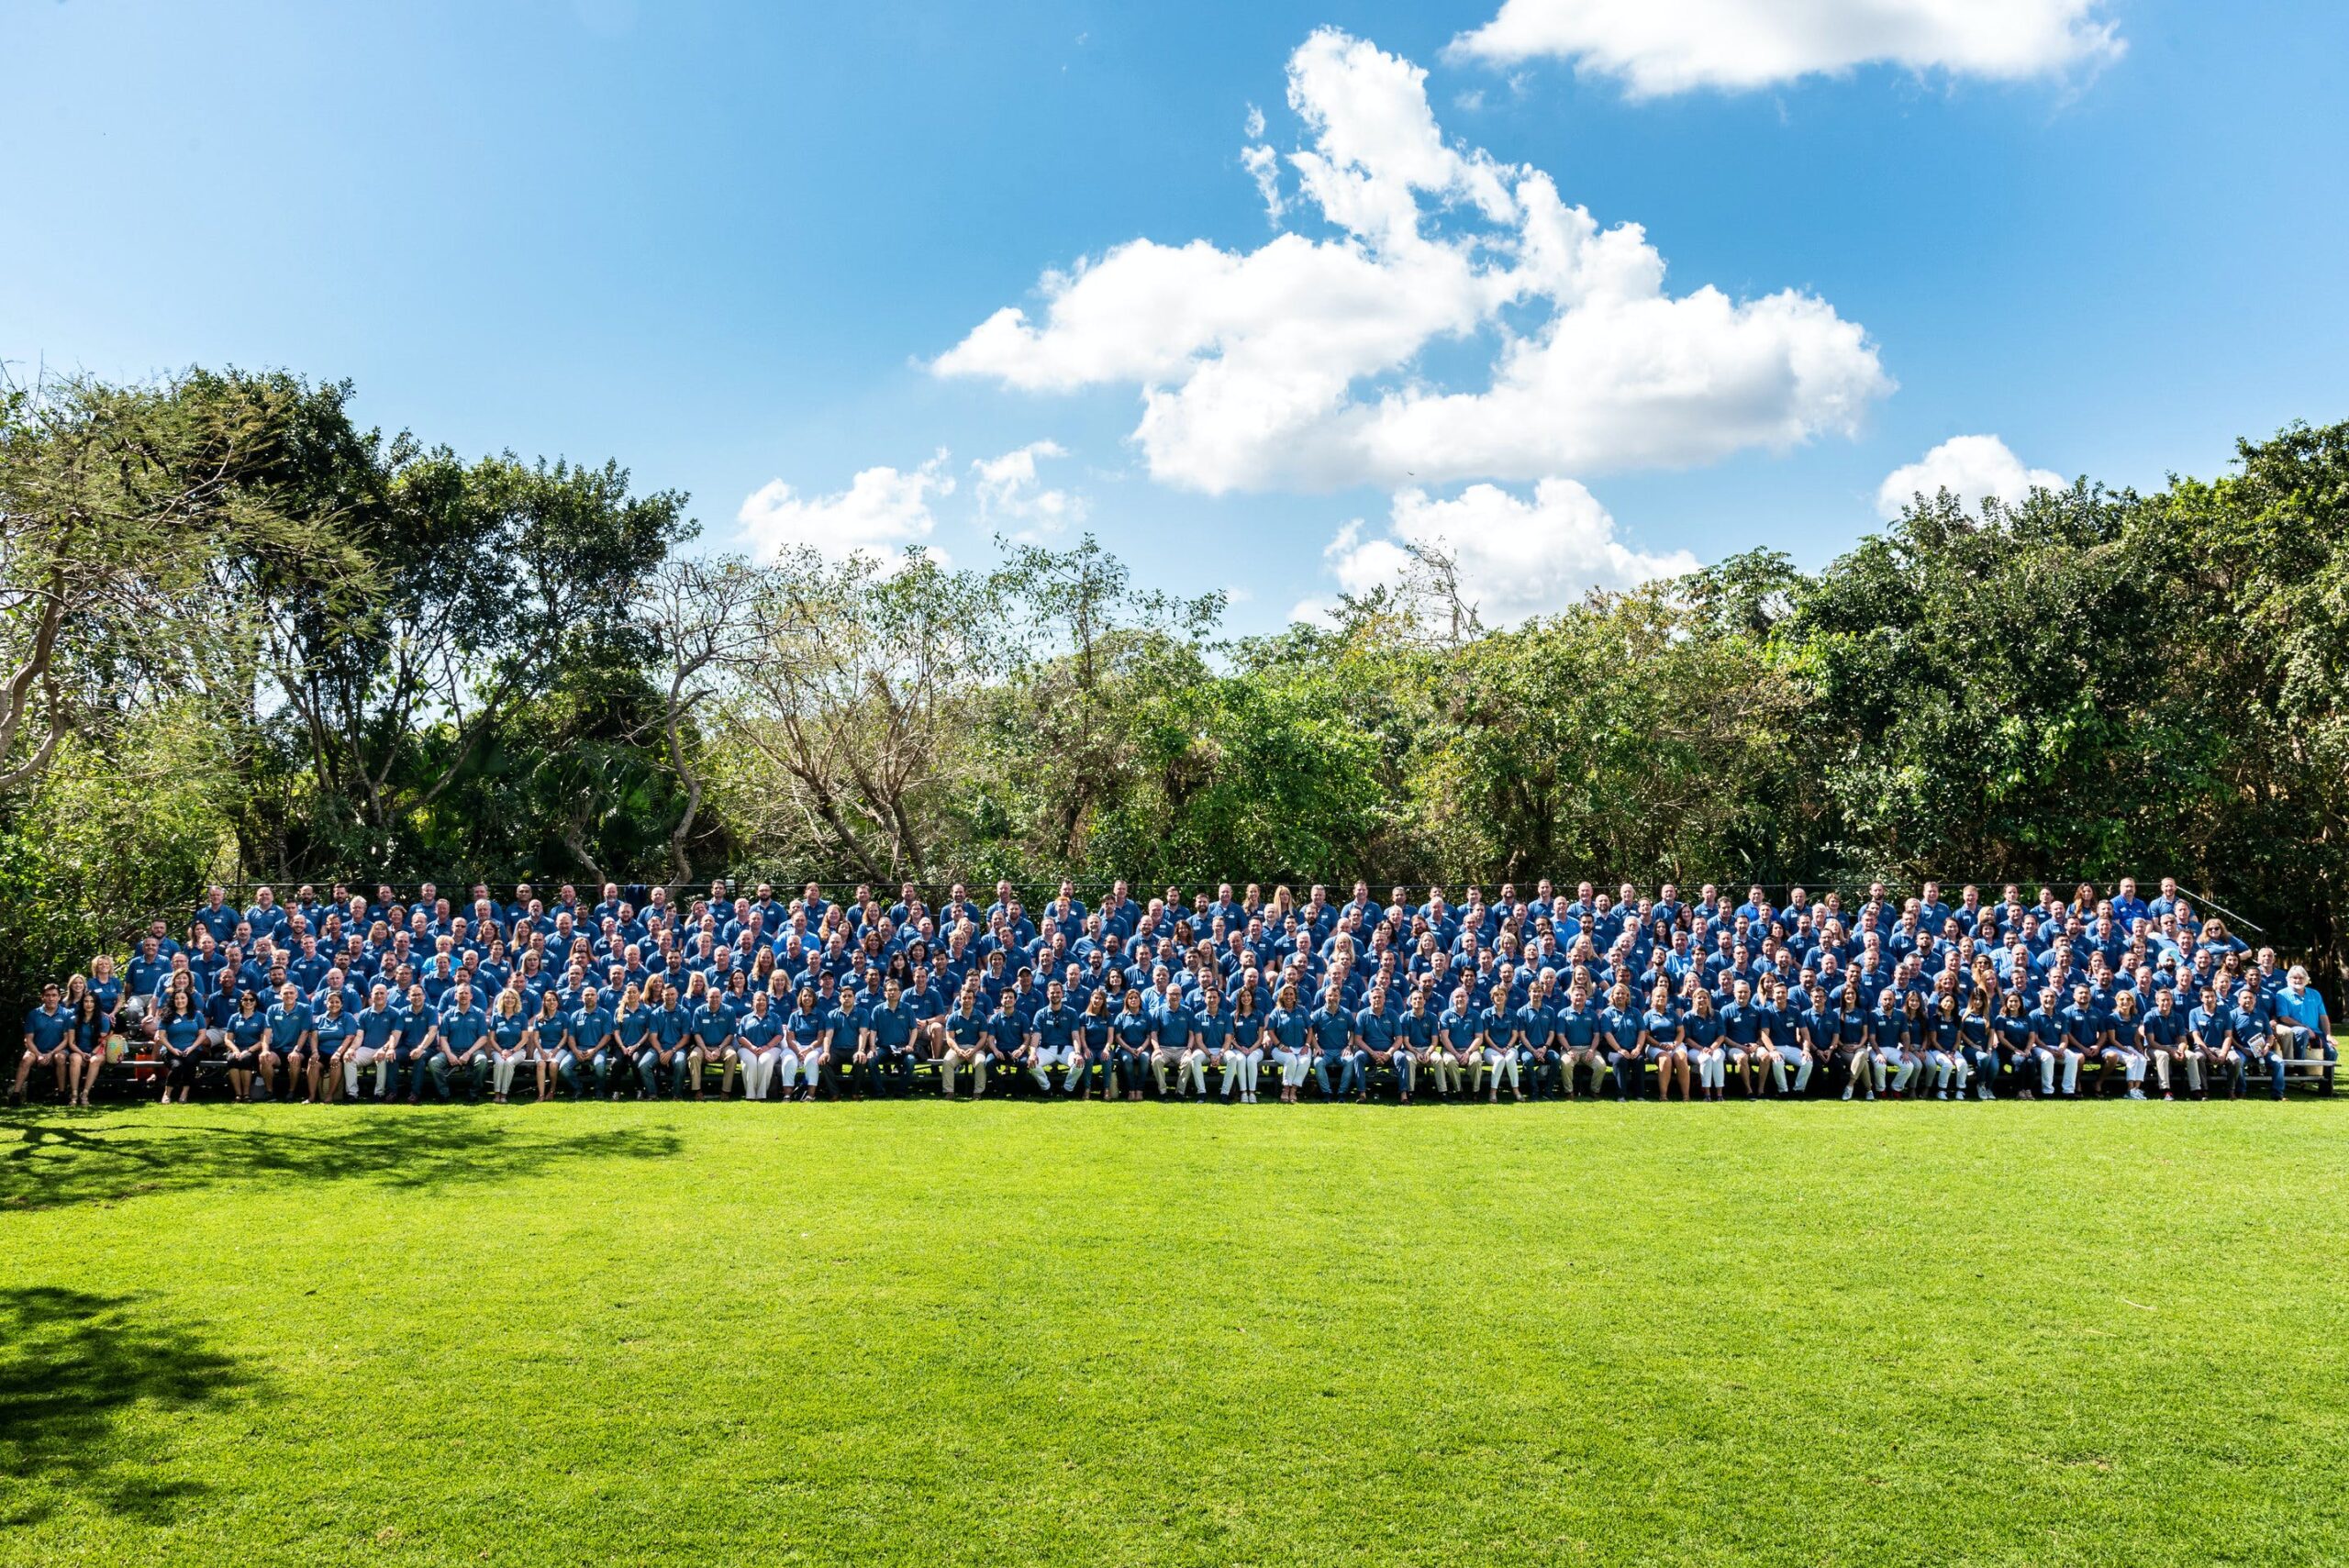 Image of rsz c100 group photo 1 2 scaled in Record number of participating companies in the latest edition of the "Cosentino 100" Convention - Cosentino